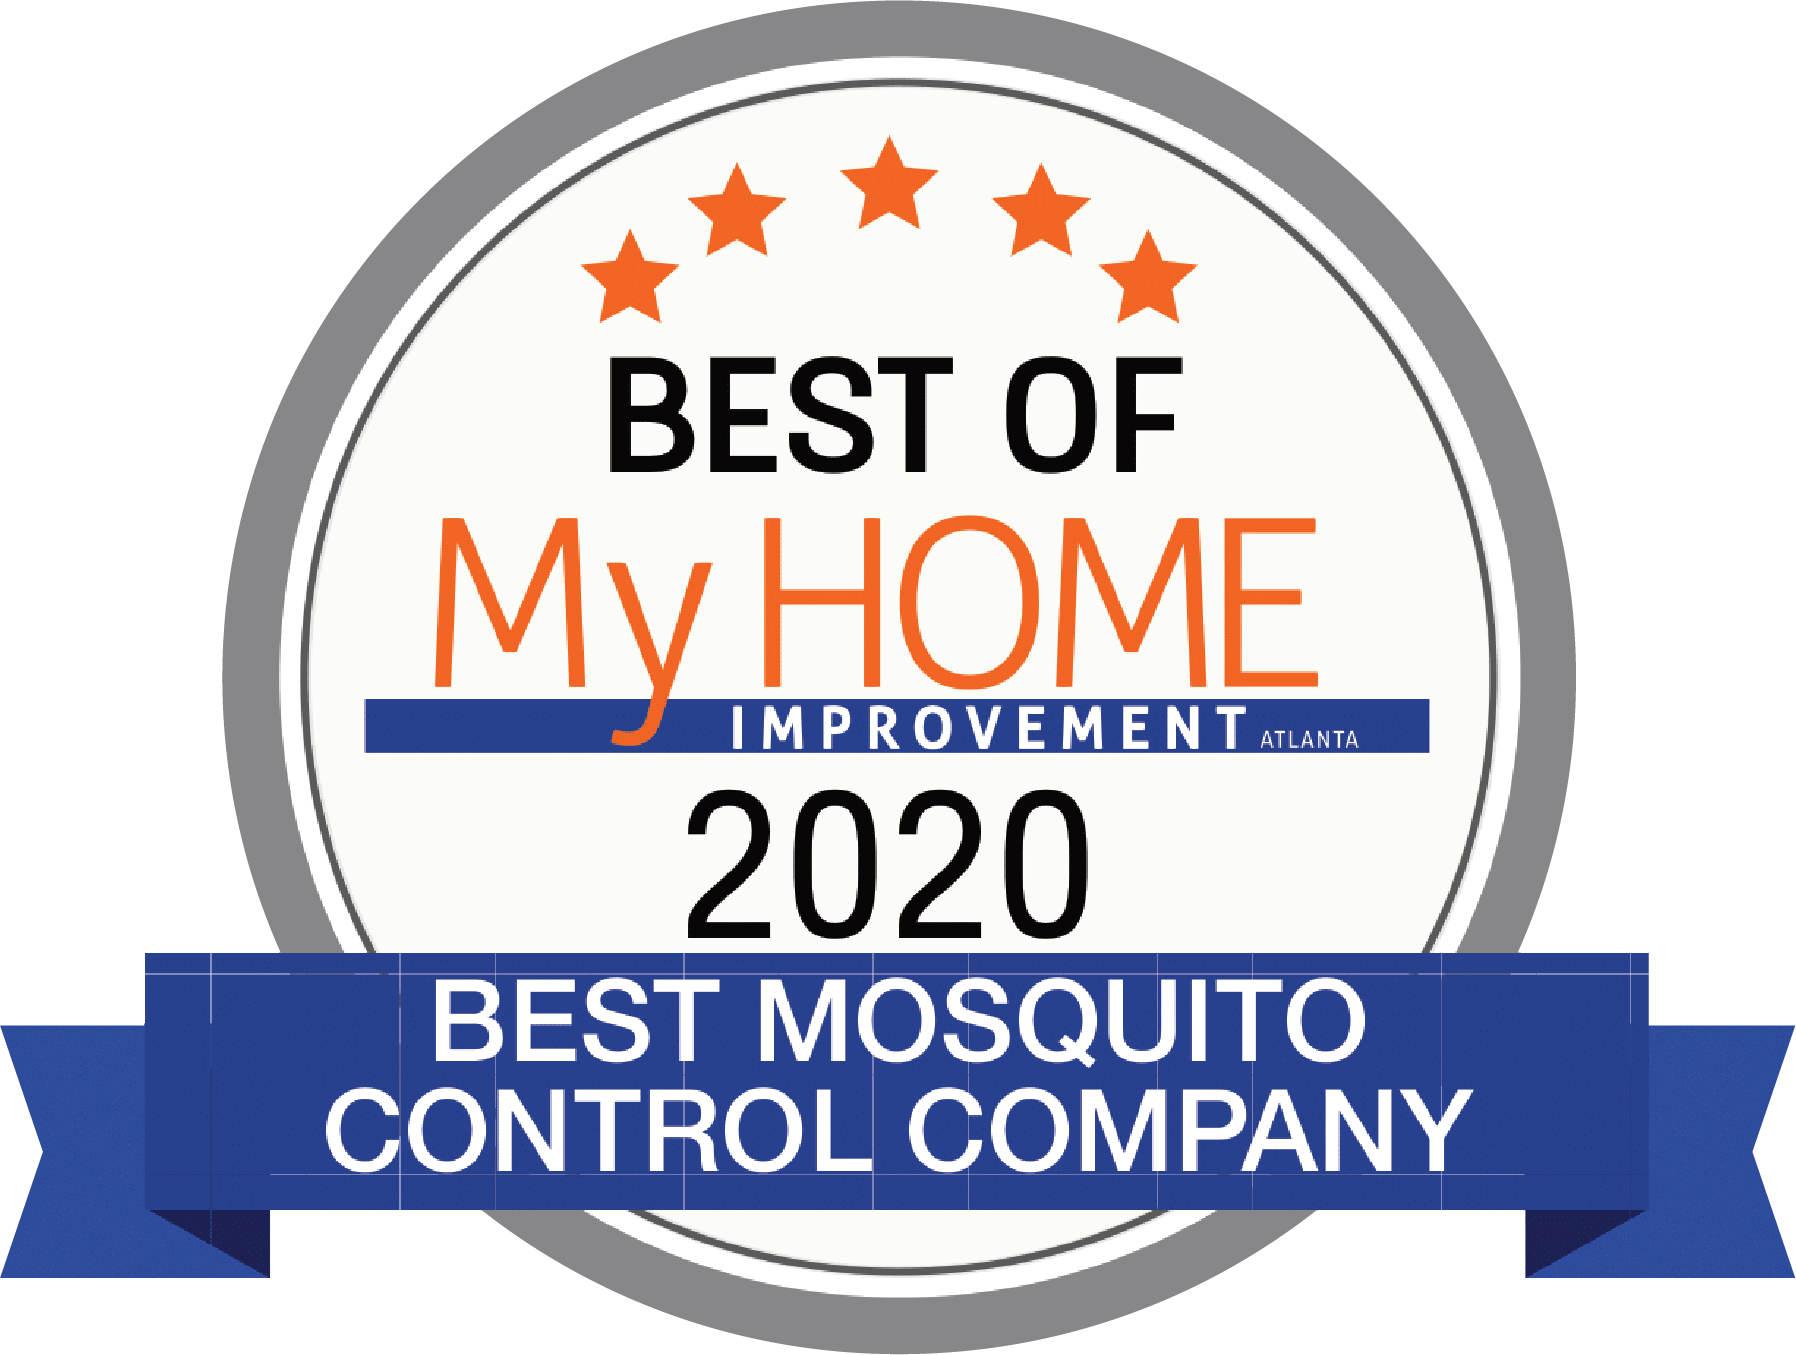 Best Mosquito Control Company awarded to Active Pest Control by MyHome Improvement 2020